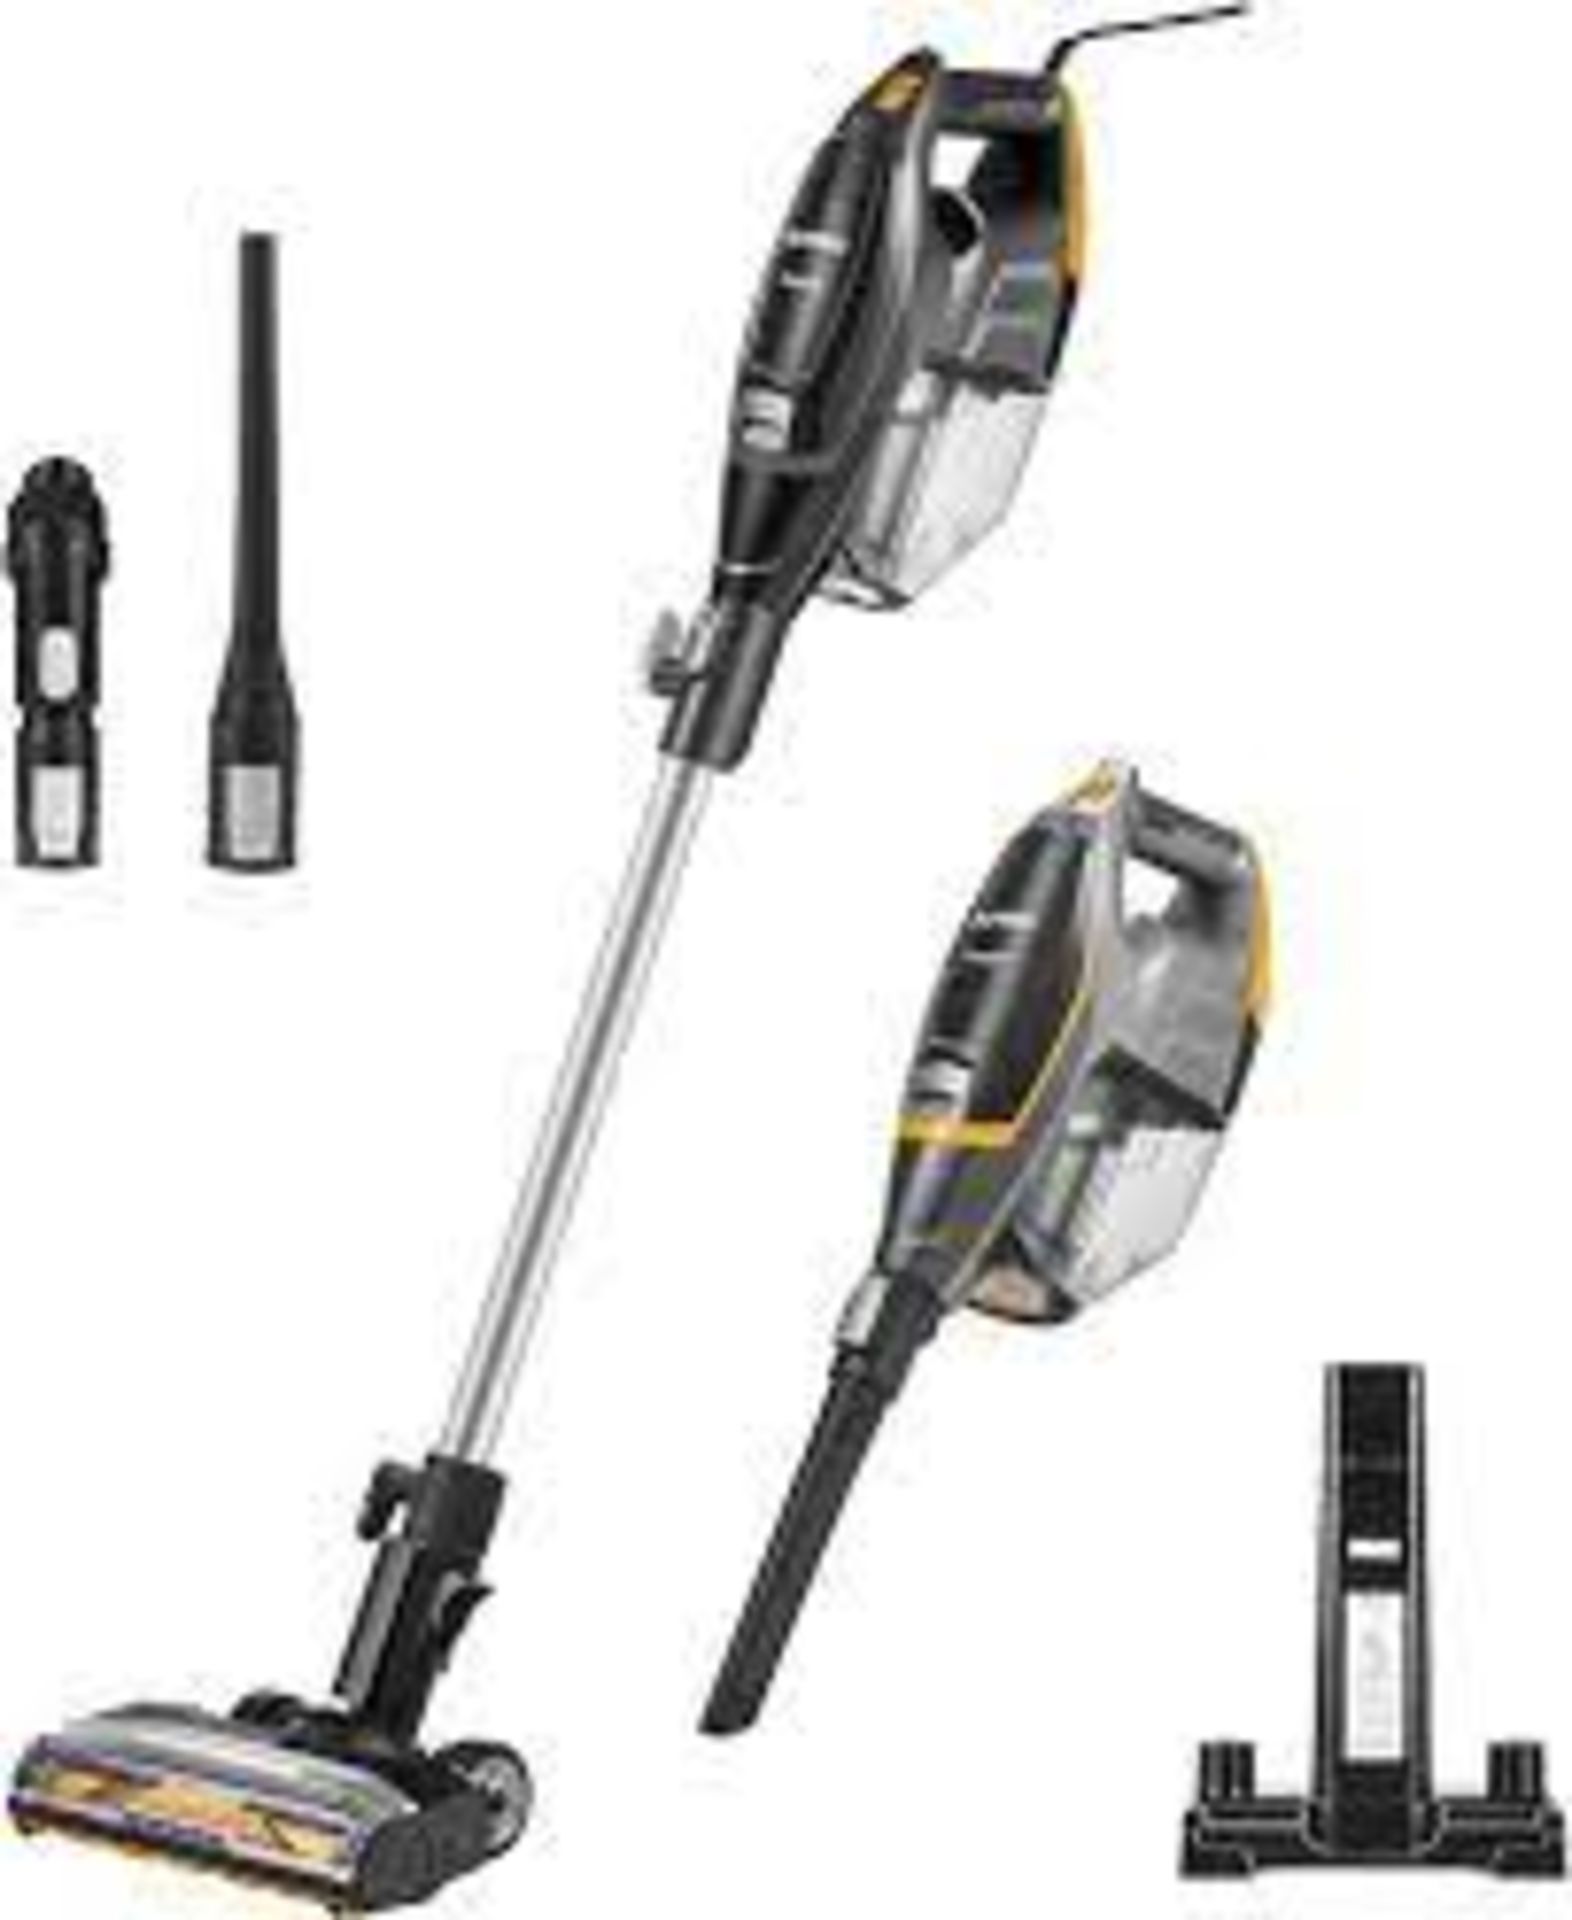 12 X BRAND NEW Eureka NES510 2-in-1 Corded Stick & Handheld Vacuum Cleaner, 400W Motor for Whole